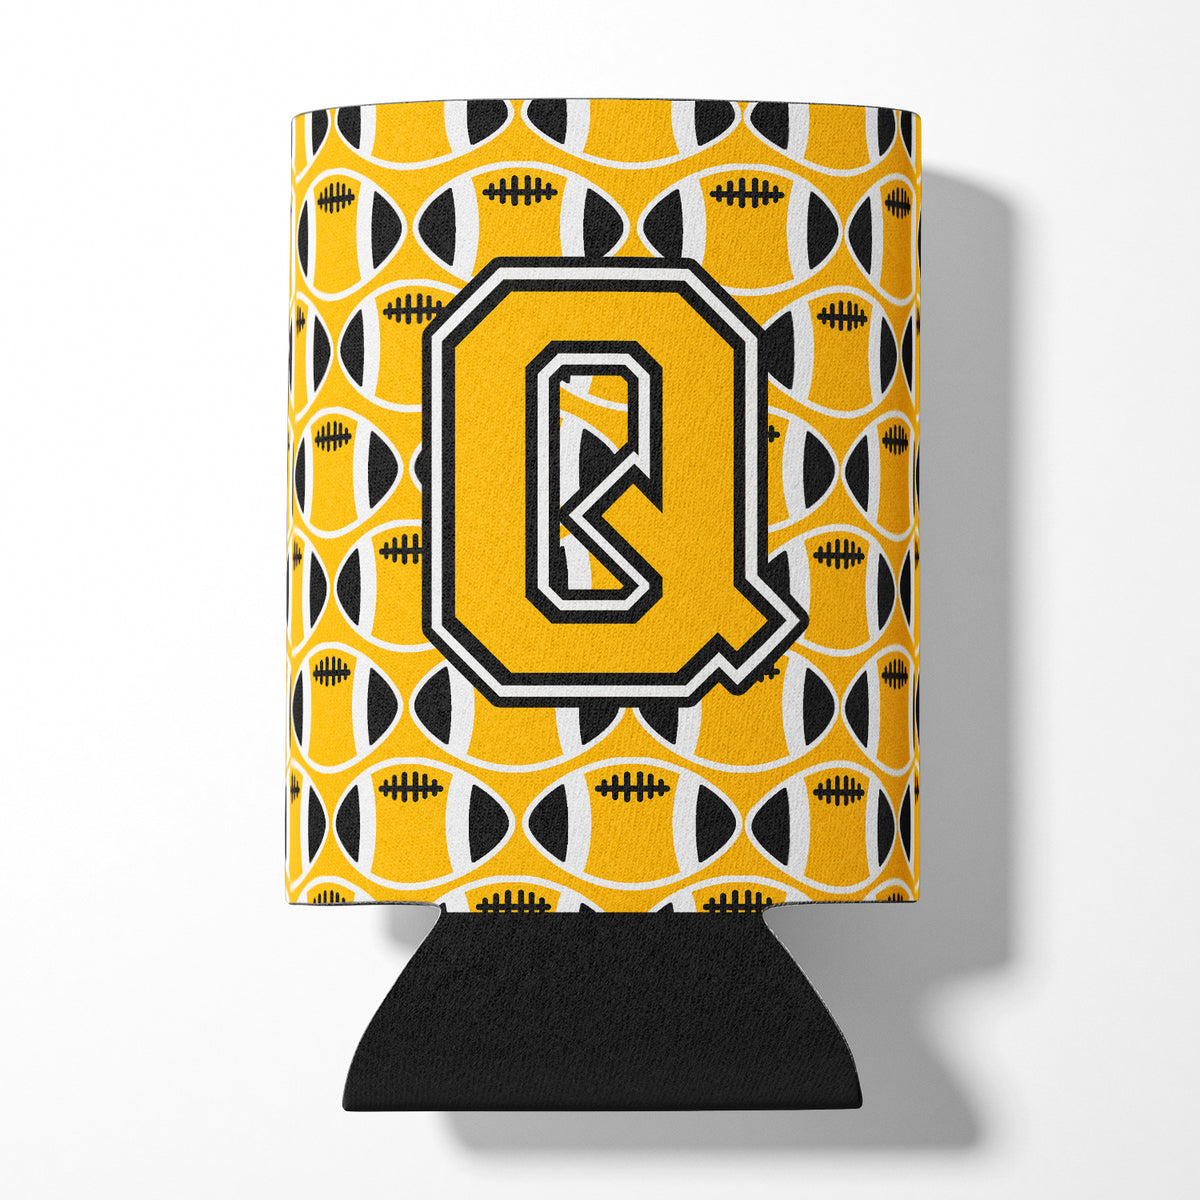 Letter Q Football Black, Old Gold and White Can or Bottle Hugger CJ1080-QCC.